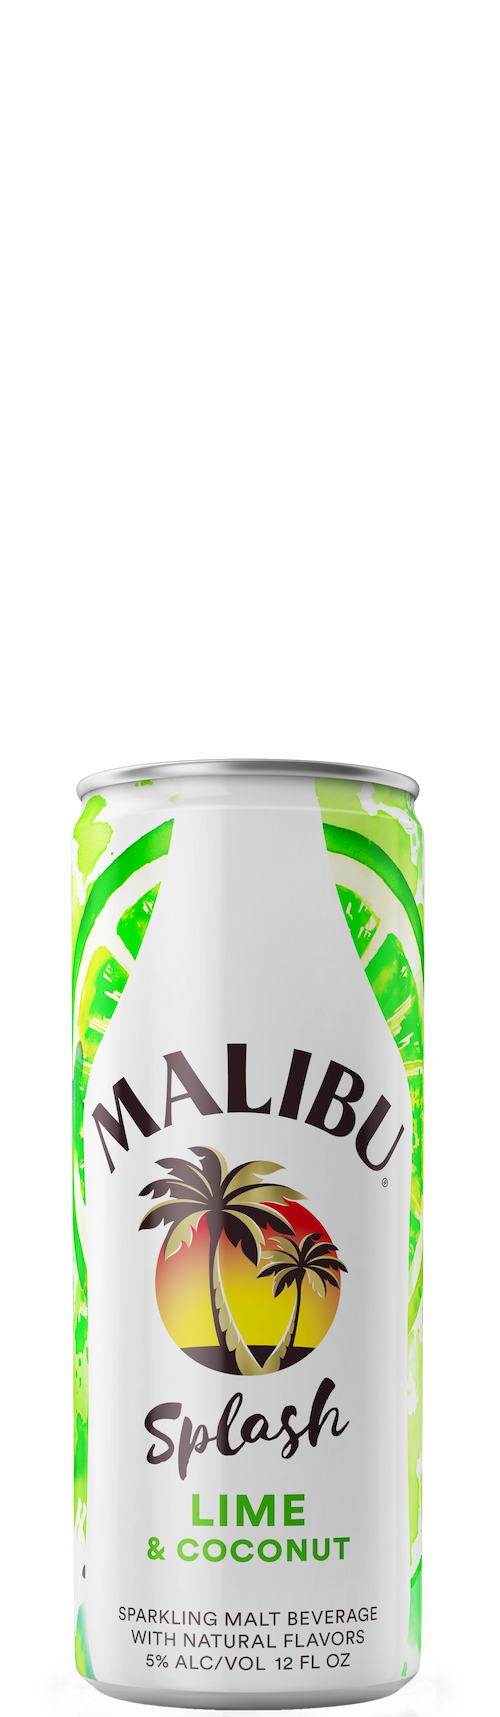 Malibu RTD splash can with lime and coconut